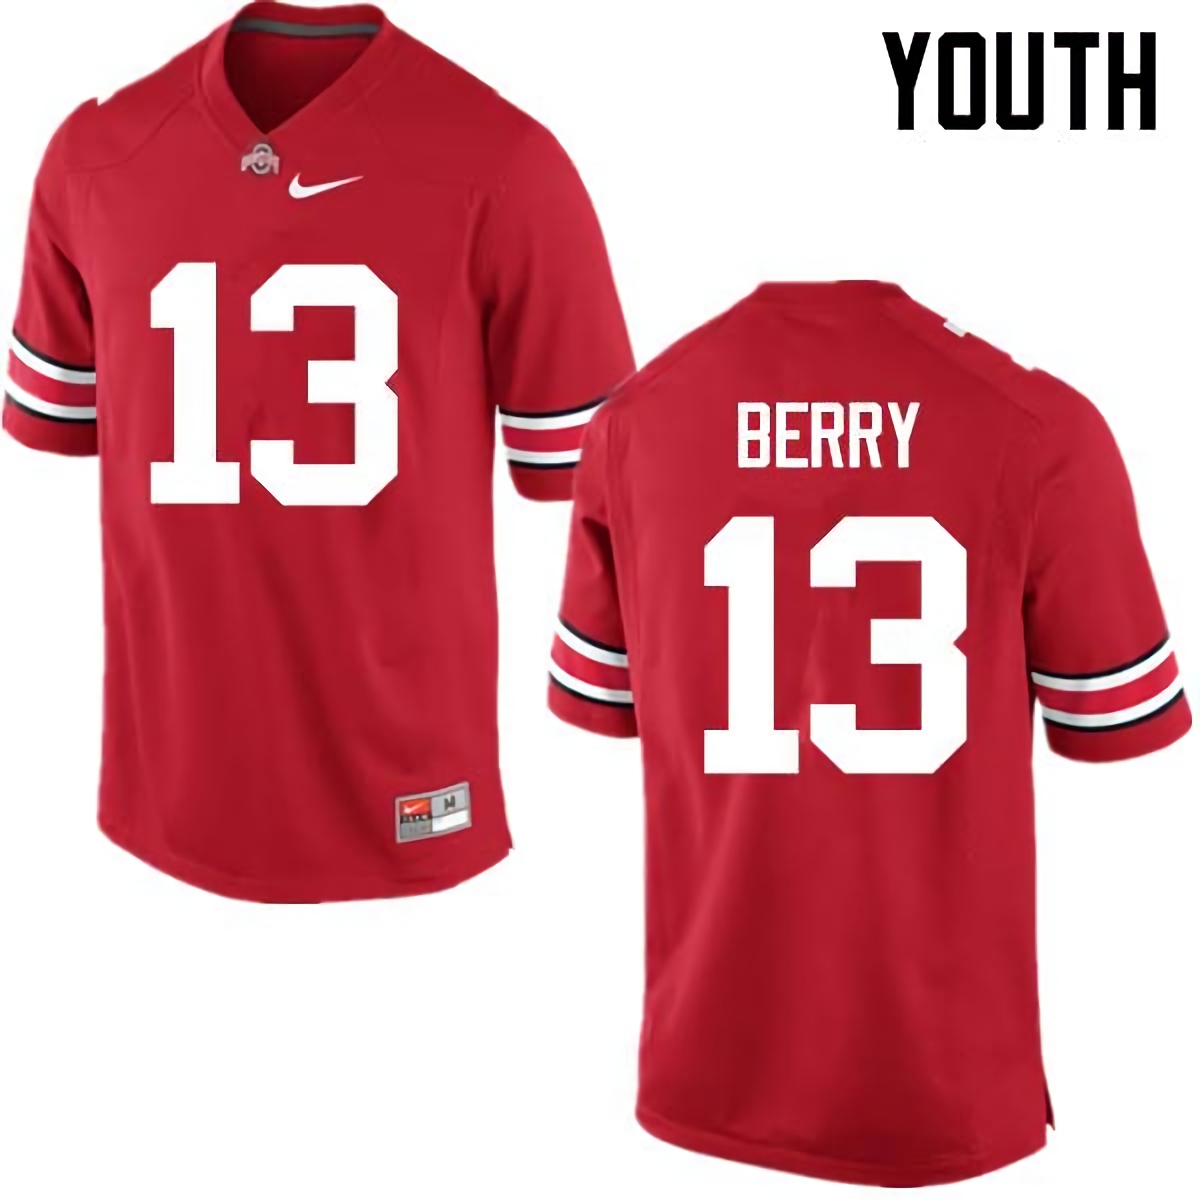 Rashod Berry Ohio State Buckeyes Youth NCAA #13 Nike Red College Stitched Football Jersey QVN6356NN